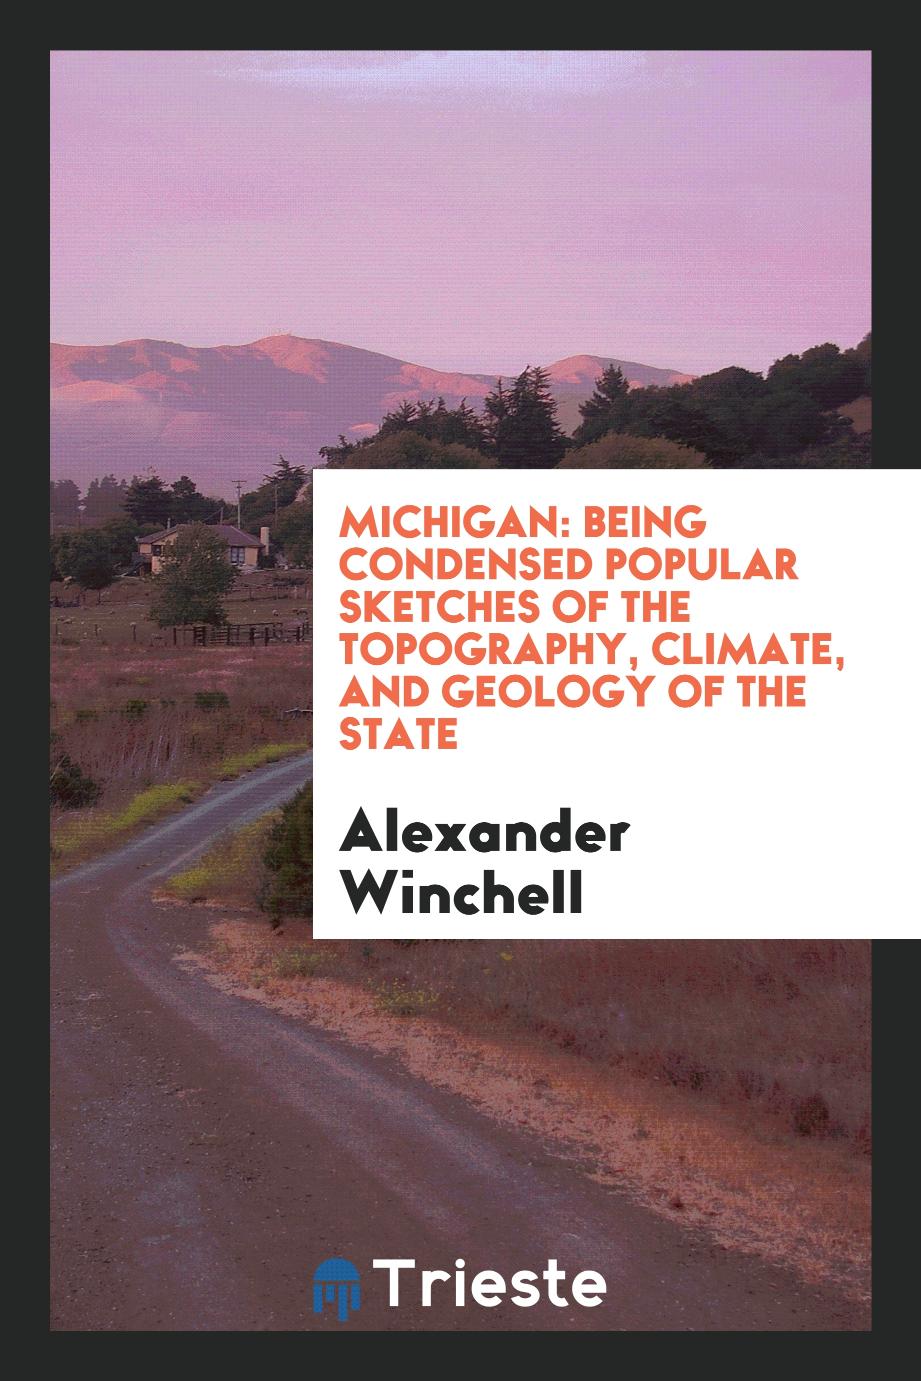 Michigan: Being Condensed Popular Sketches of the Topography, Climate, and Geology of the State